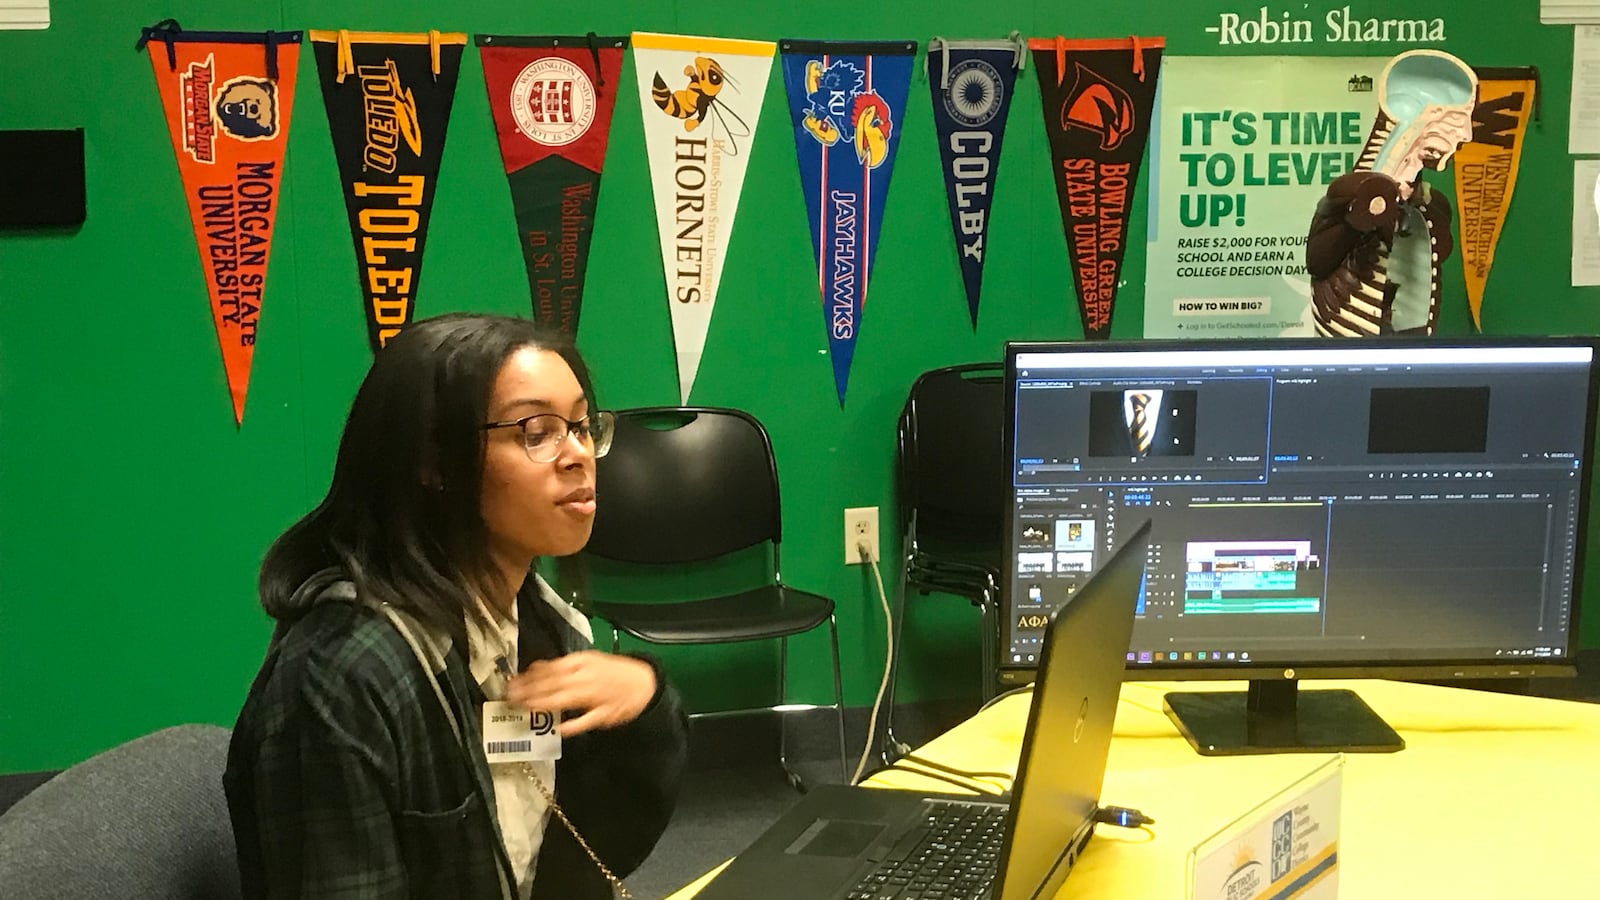 A student from Detroit School of Arts demonstrates using film editing software during a press conference about the Detroit district's efforts to increase career pathways and college dual enrollment courses.